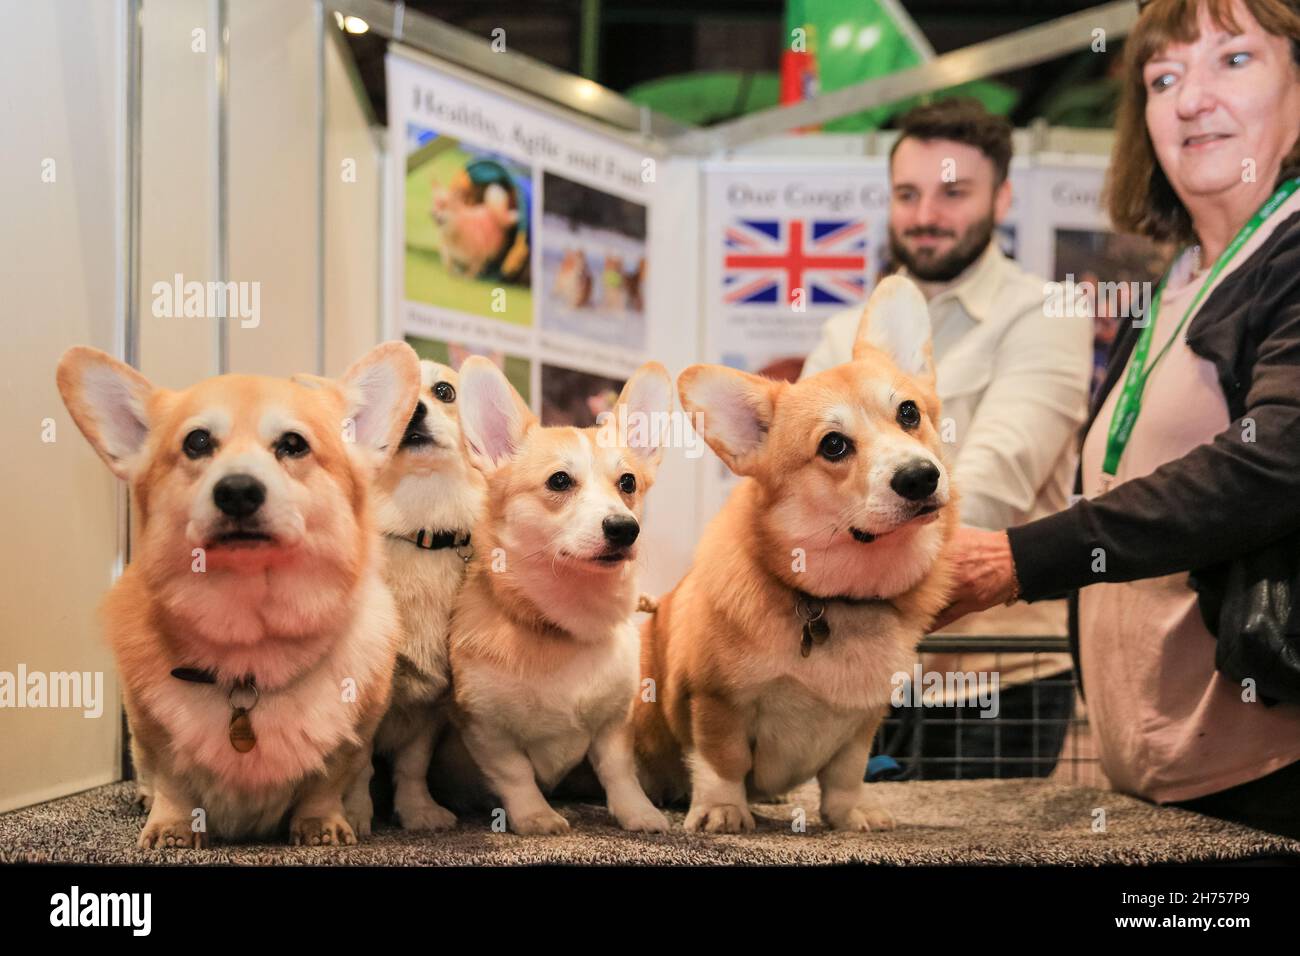 Excel Exhibition Centre, London, UK. 20th Nov, 2021. Welsh Corgis (Pembroke) Edward, Coby, Lola and Barney, famous for being the breed of Corgi the Queen keeps, happily pose at the Welsh Corgi League stand. London's biggest dog event, Discover Dogs, returns to ExCeL London, giving visitors the opportunity to meet, greet and cuddle hundreds of dogs, and to celebrate the ways in which man's best friend helped thousands and have been our everyday heroes during the pandemic. The show is organised by The Kennel Club. Credit: Imageplotter/Alamy Live News Stock Photo